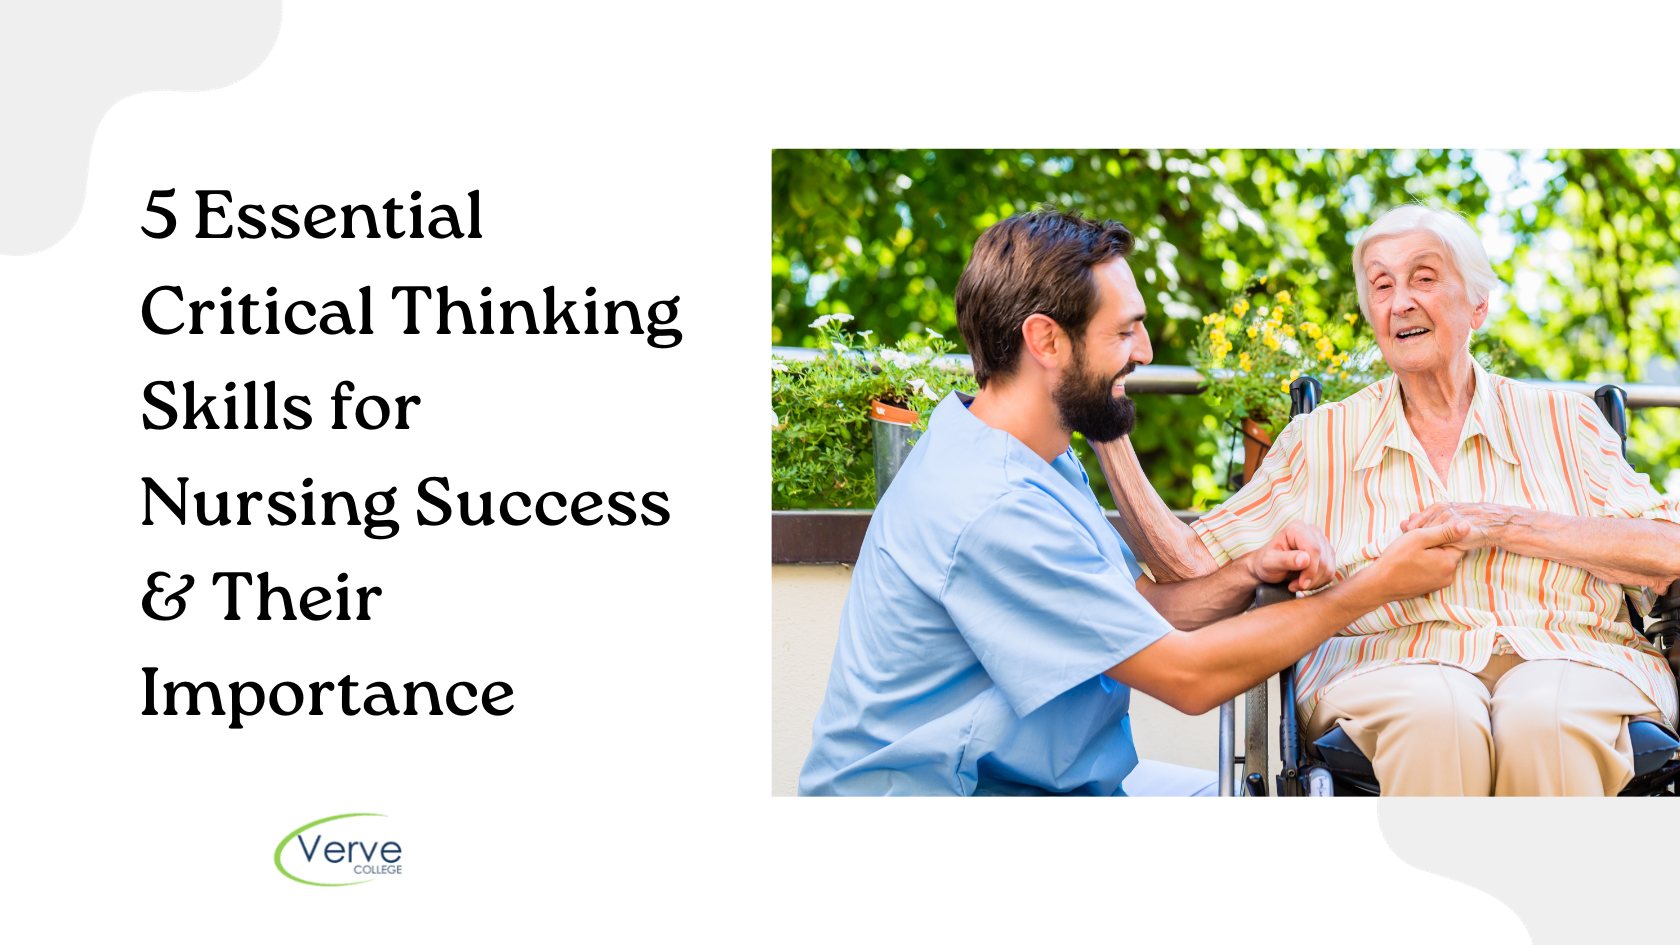 5 Essential Critical Thinking Skills for Nursing Success & Their Importance